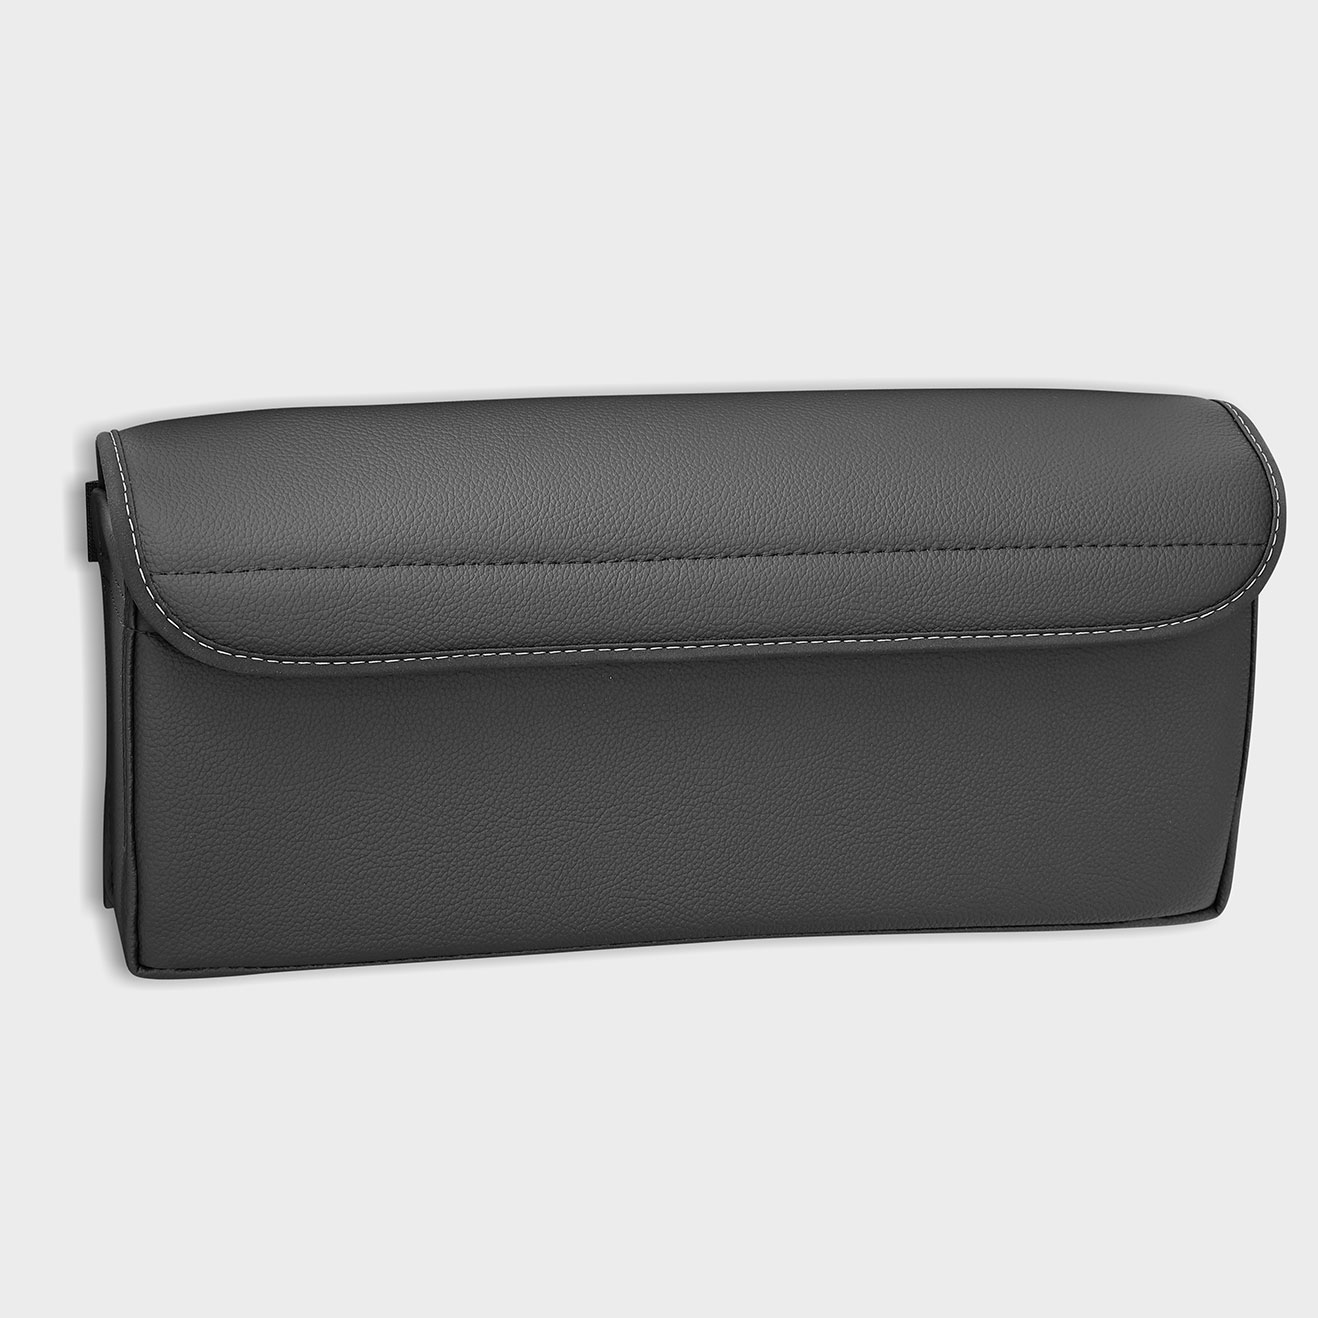 Brandrup MULITBOX CarryBag®, Marco-Polo